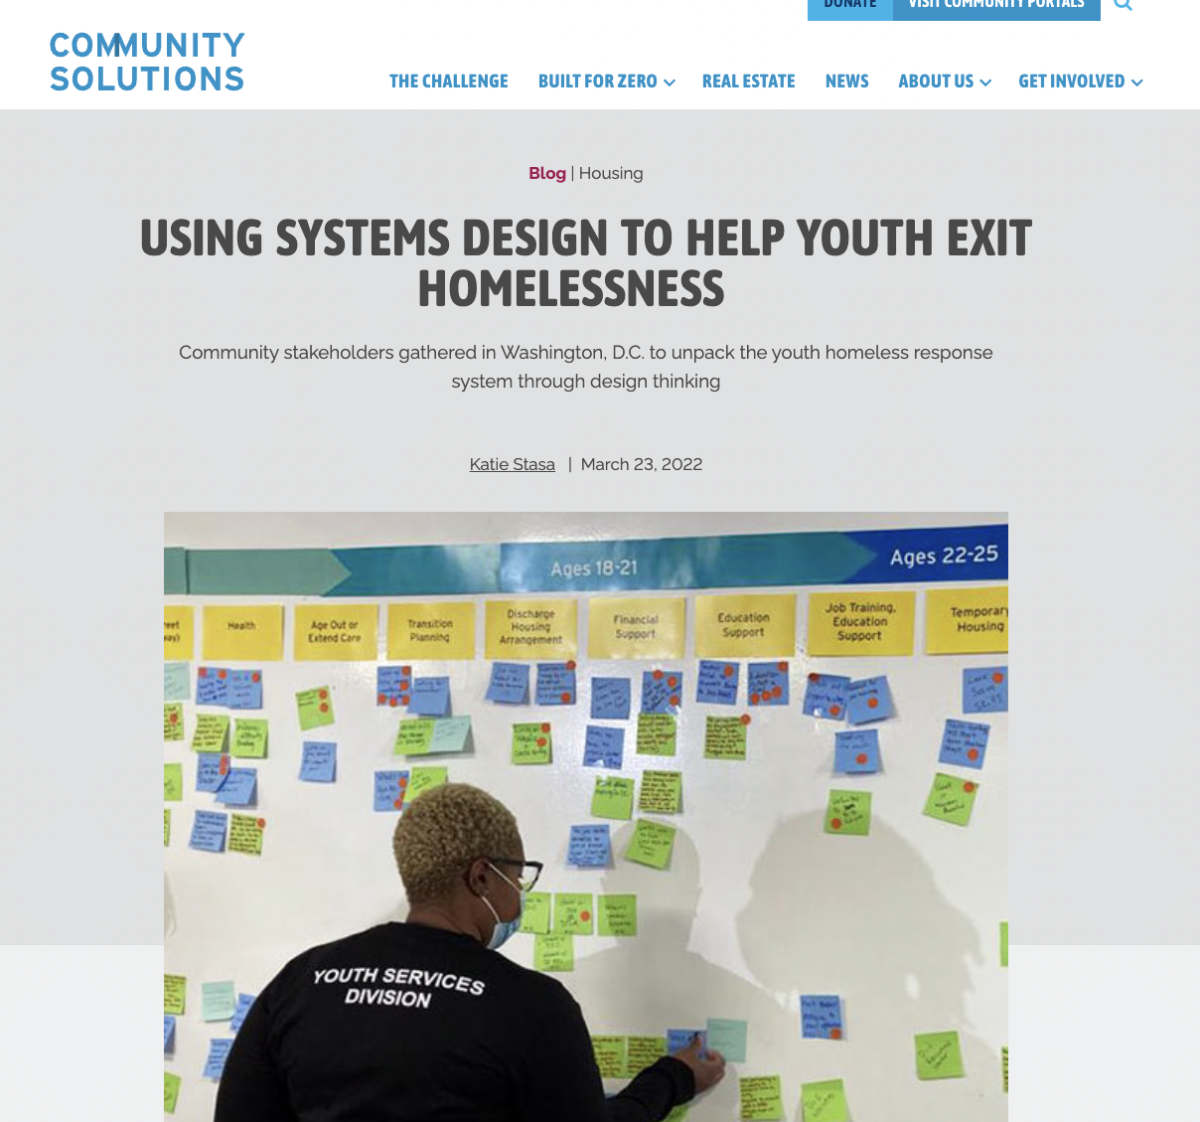 https://community.solutions/using-systems-design-to-help-youth-exit-homelessness%ef%bf%bc/